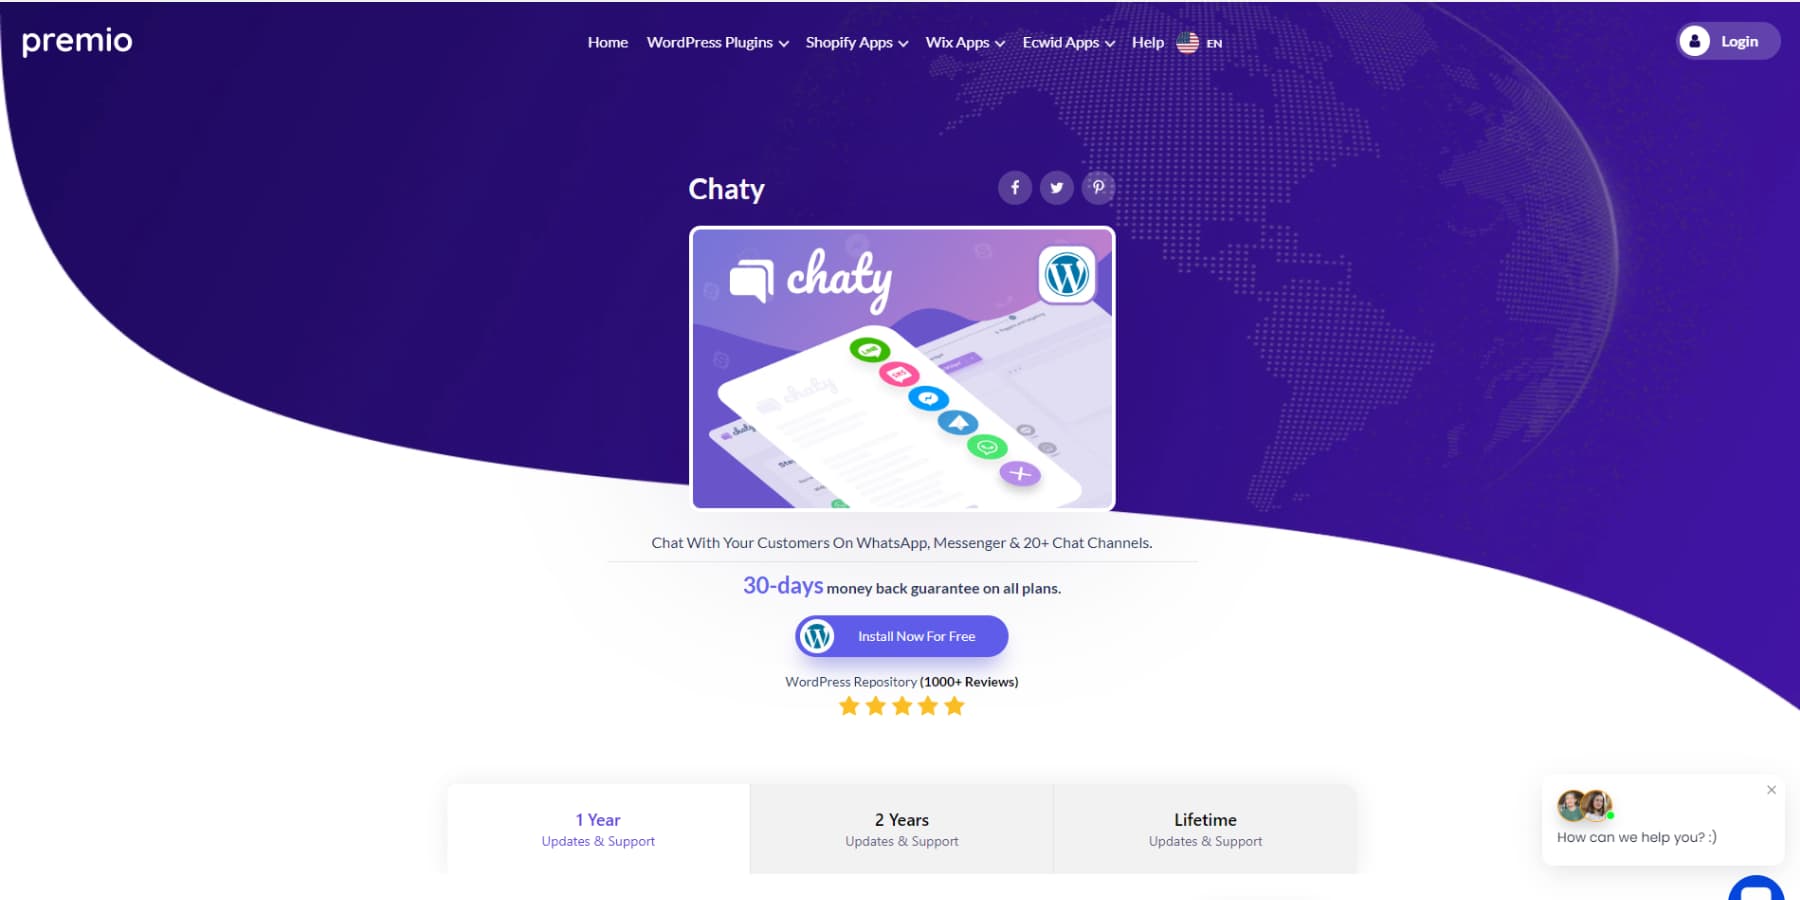 A screenshot of Chaty's home page